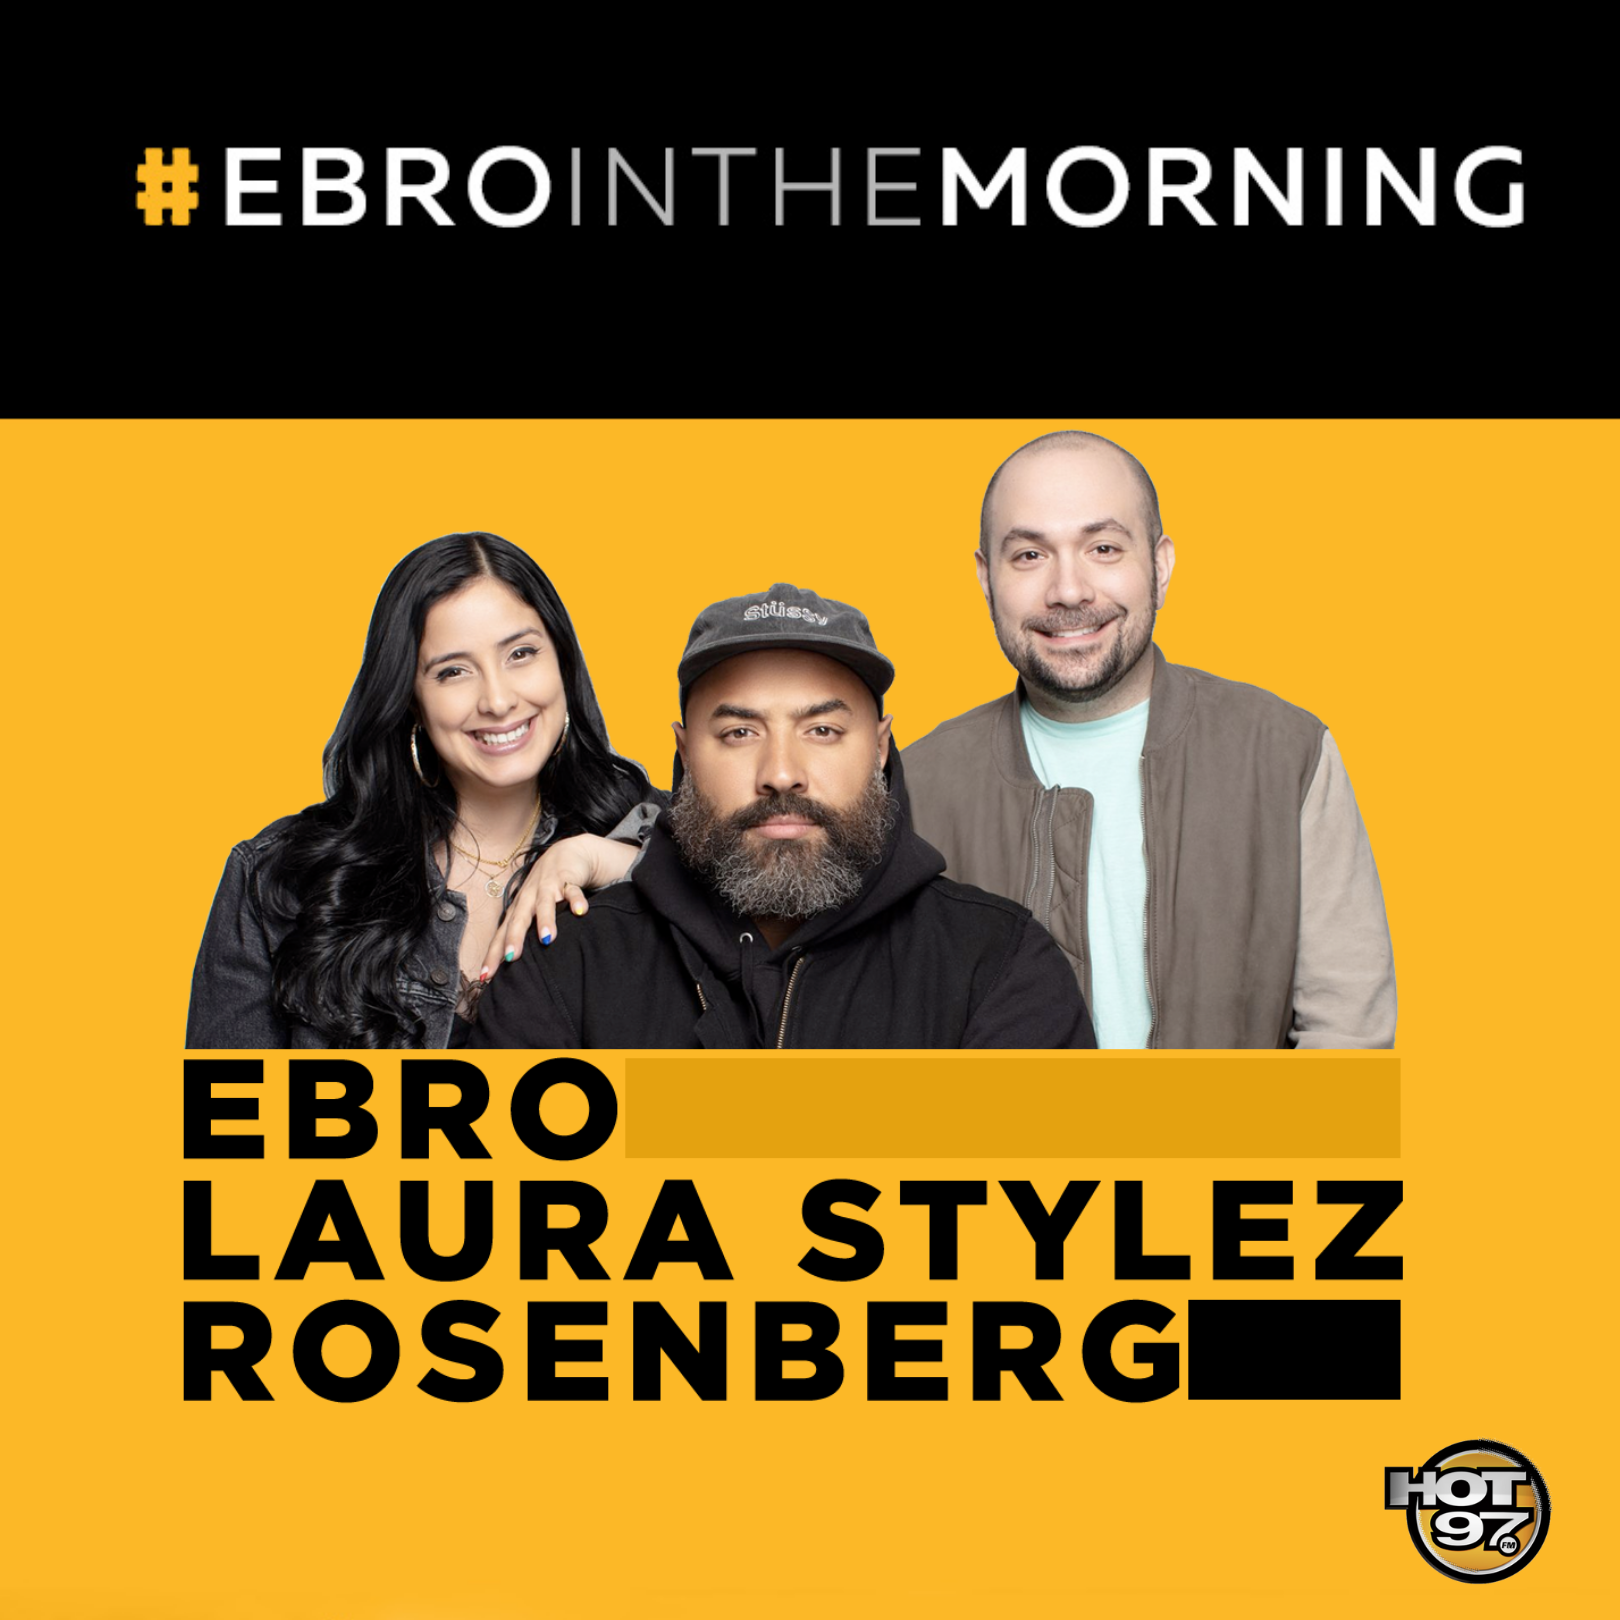 Ebro Baby Watch + Gucci Store Robbed In NYC! | Ebro in the Morning LIVE After The Live Program-Show.